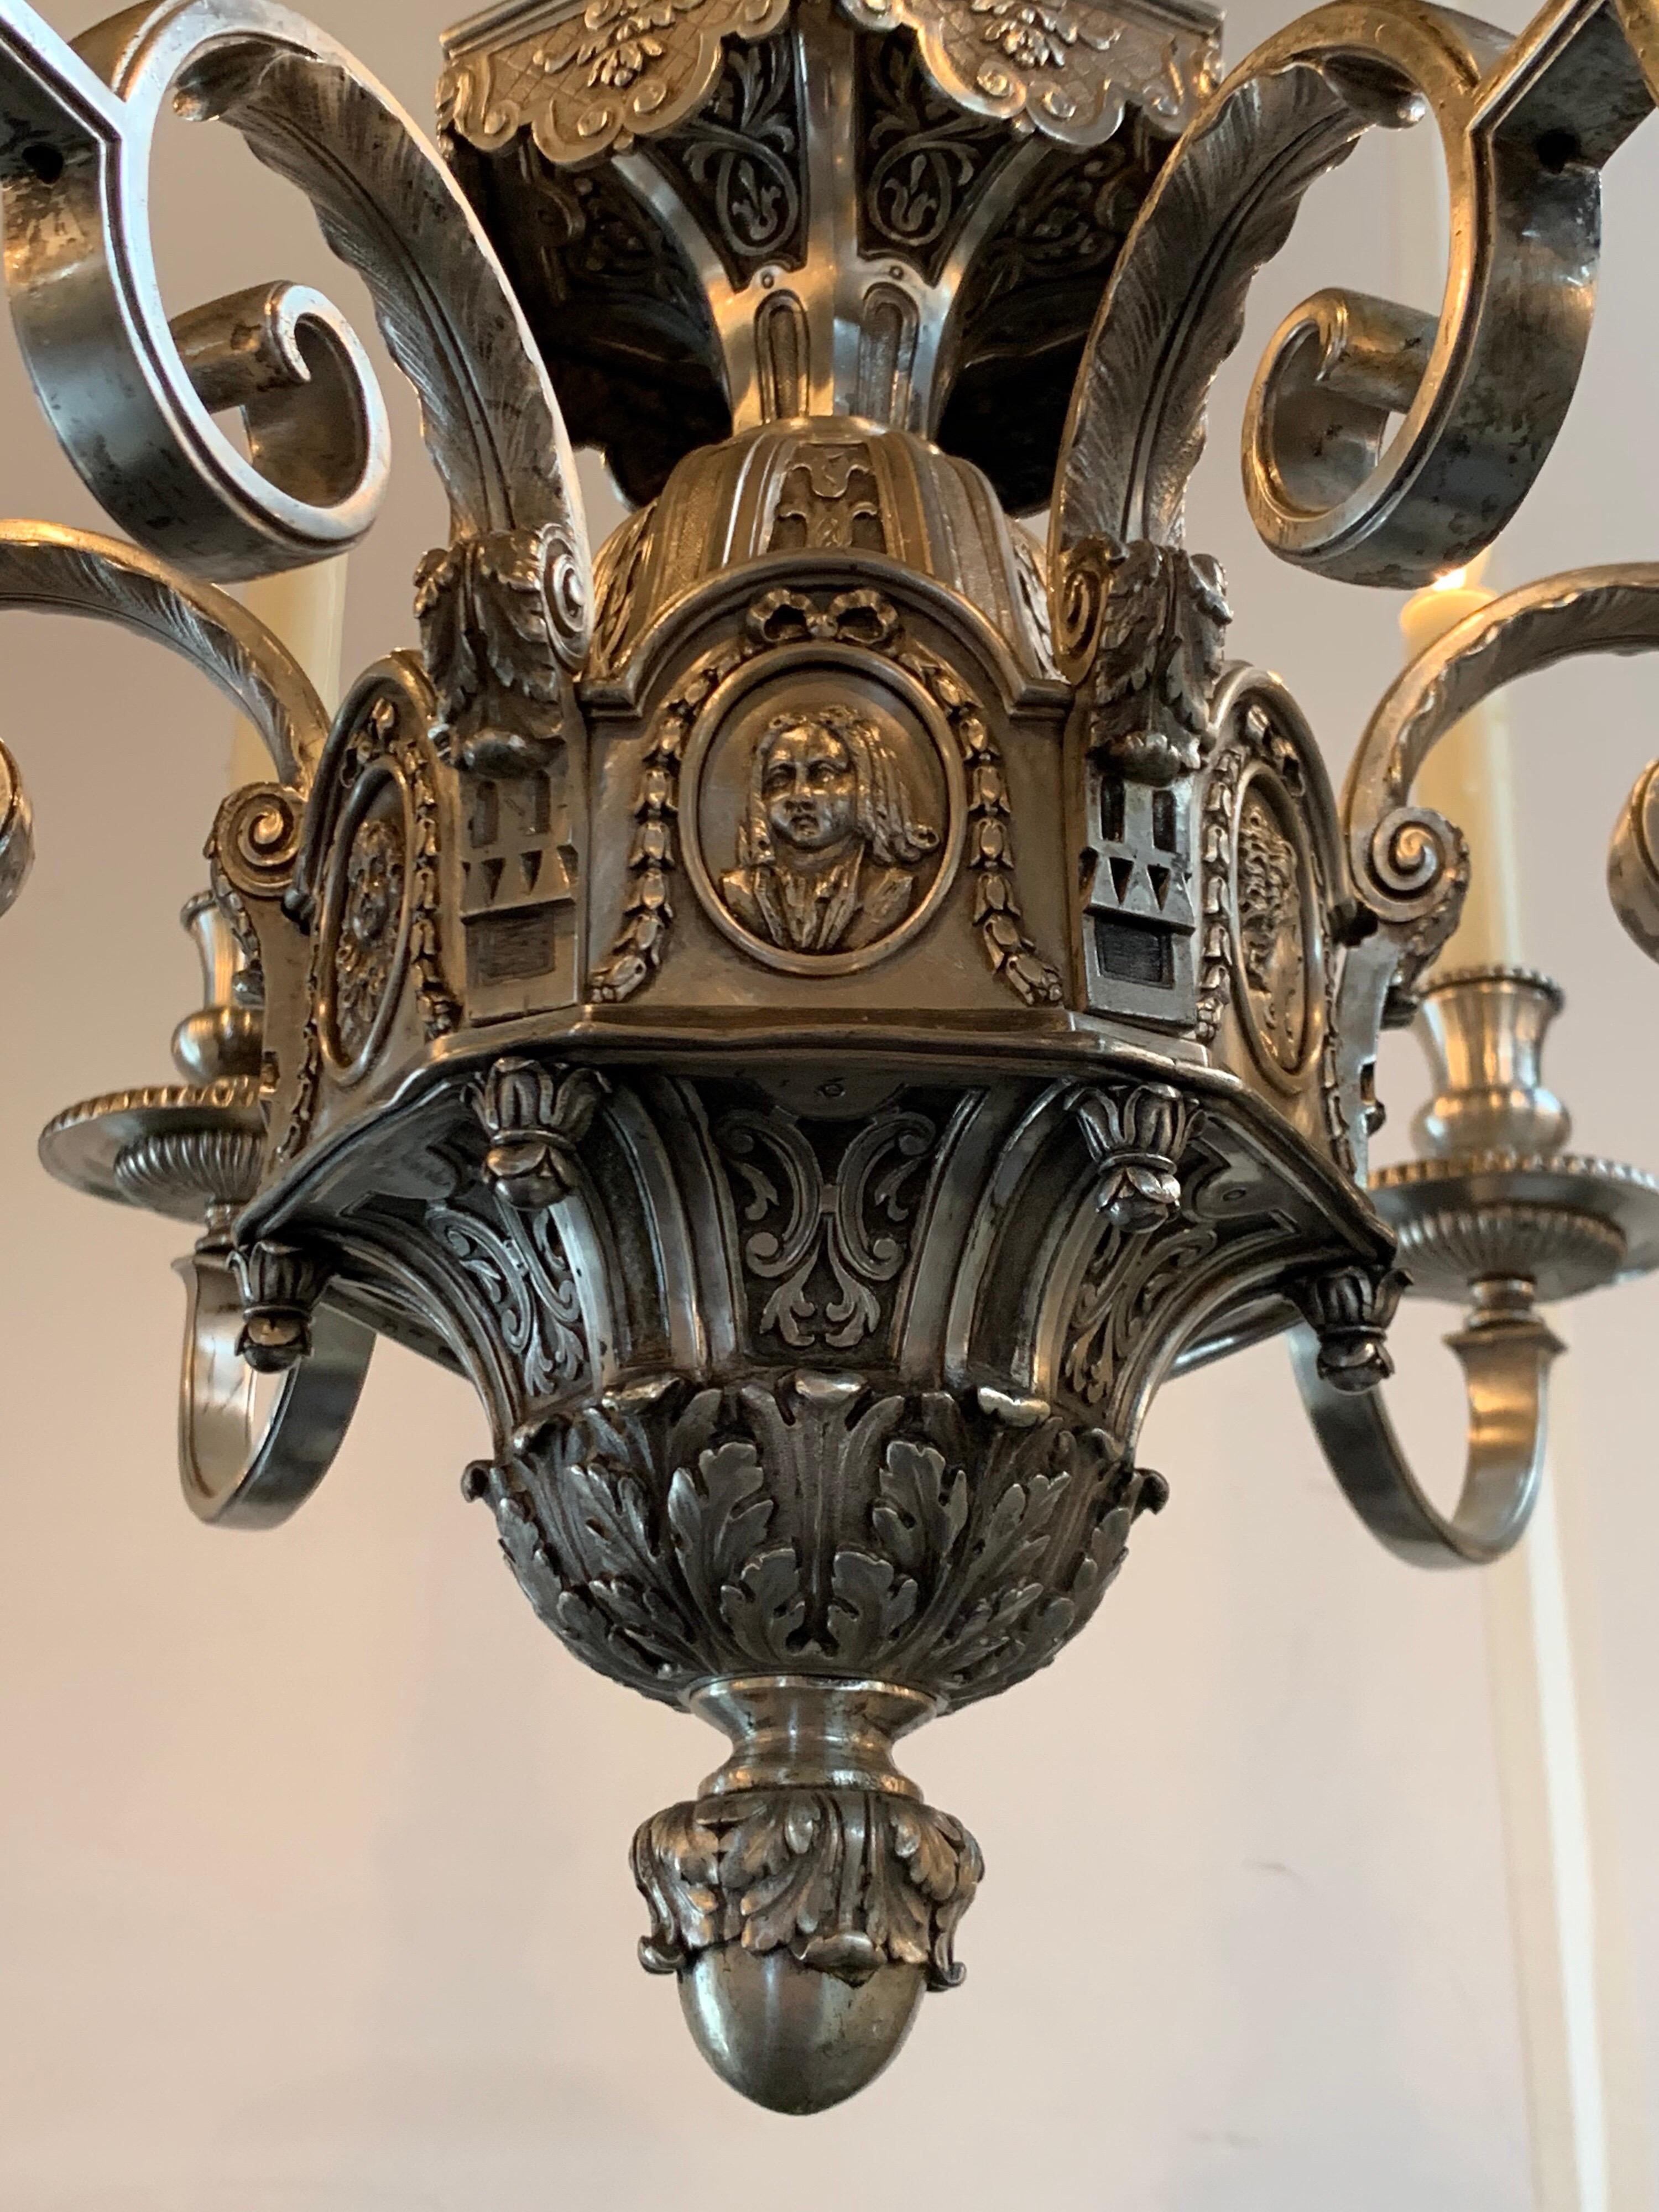 Beautiful 19th century English neoclassical style chandelier with 6 lights. Gorgeous silver over bronze finish with amazing decorative details.